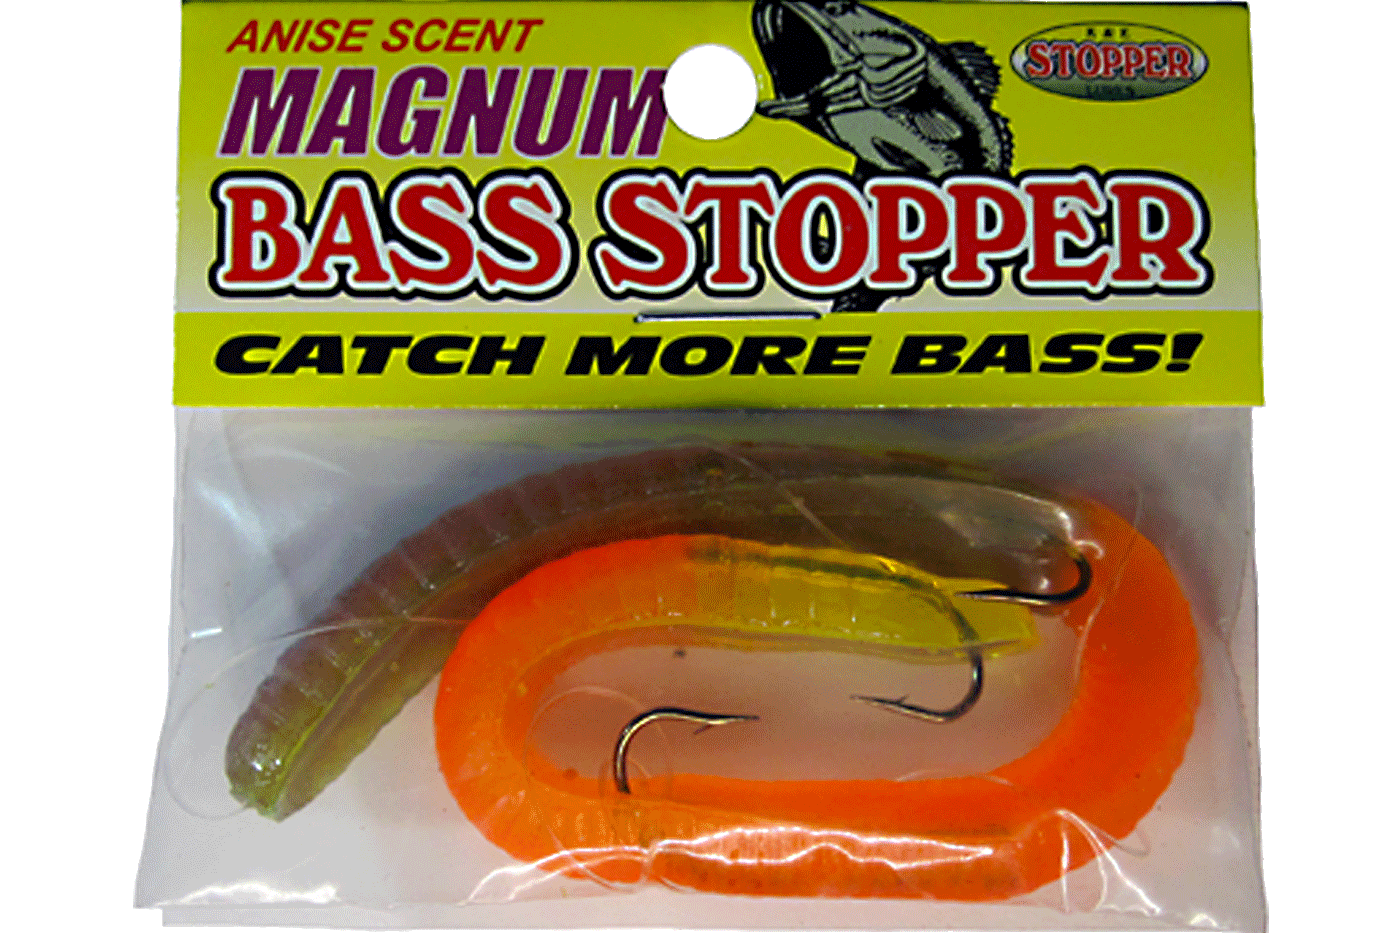 Bass Stopper Worms = KISS! –